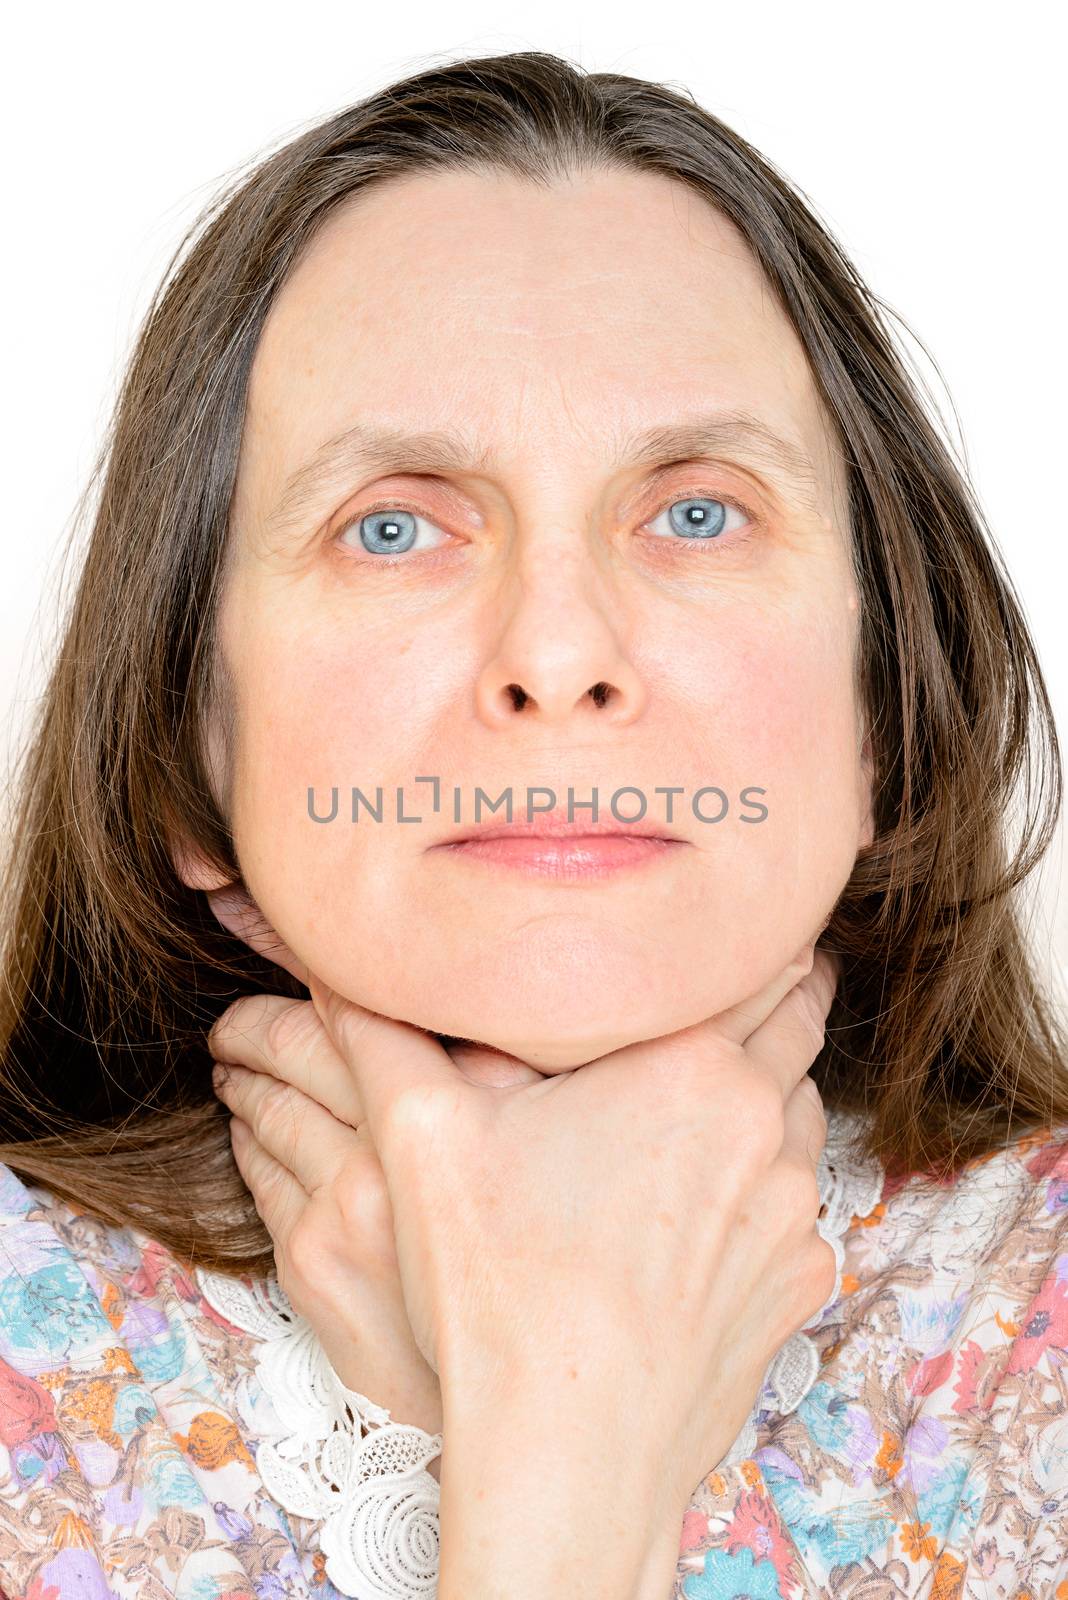 Adult woman with the hands around her neck, as if she wants to strangle herself, to symbolize sore throat